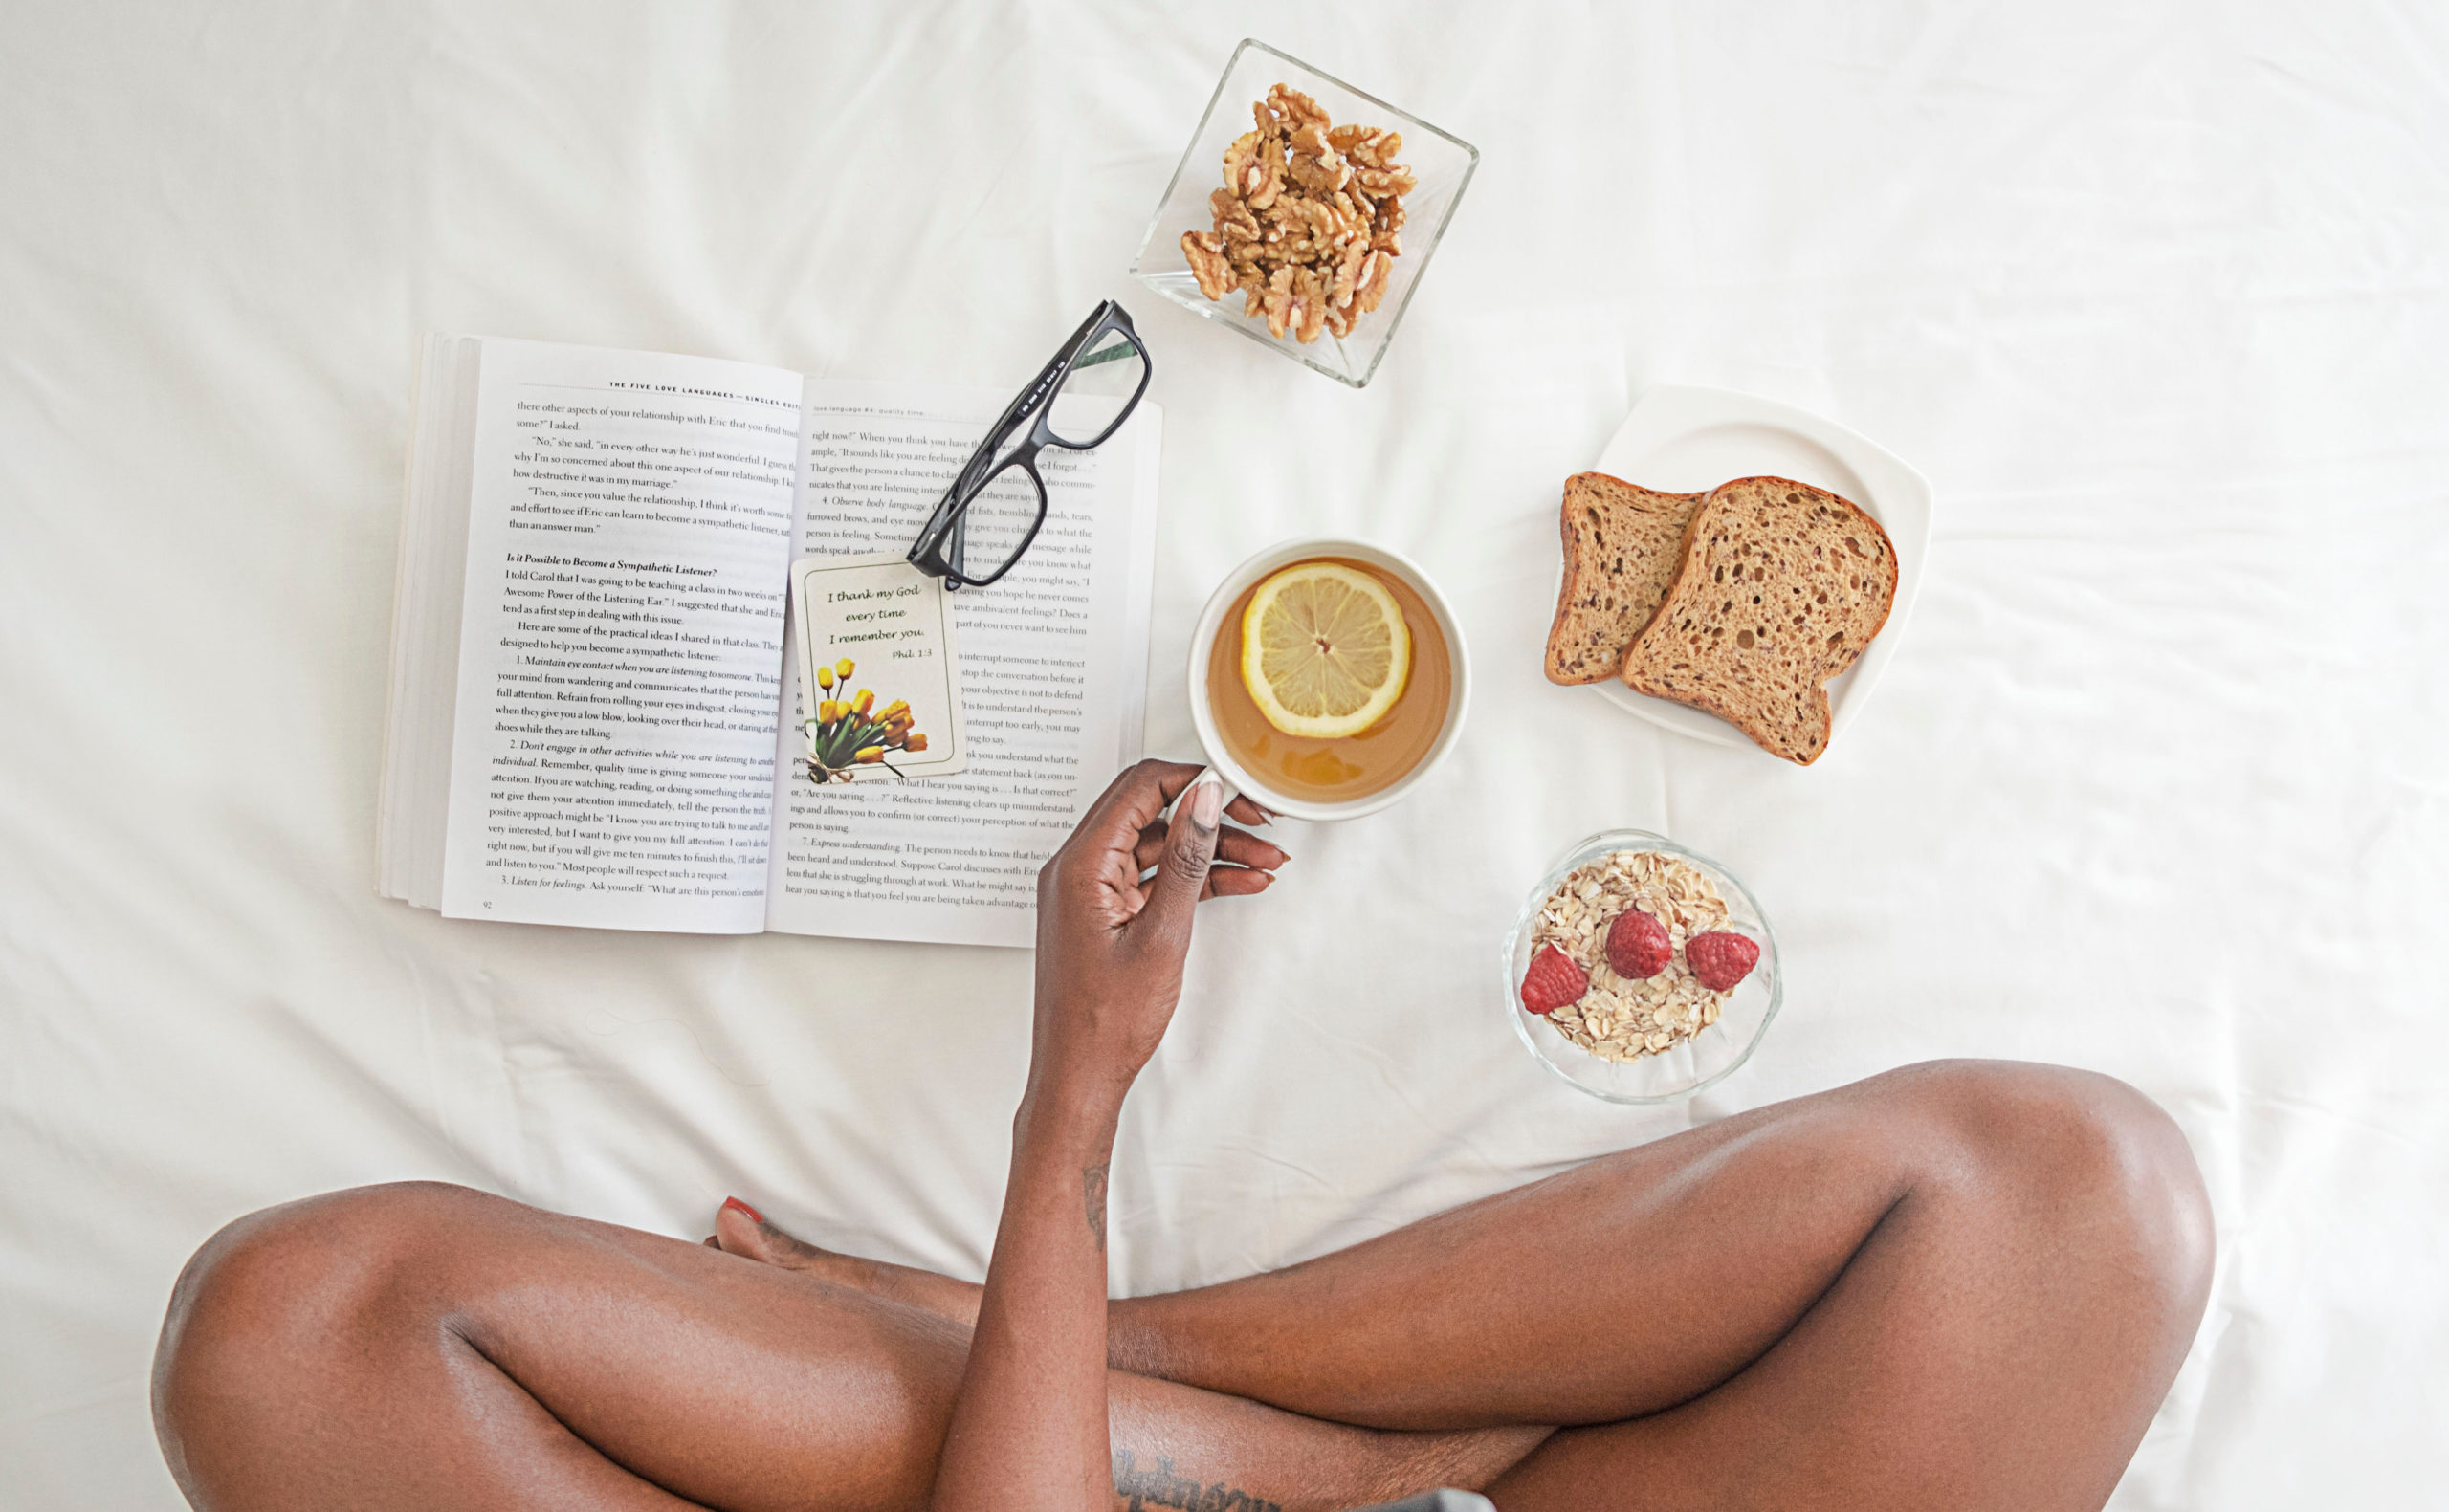 Canva – Person Holding White Ceramic Mug With Lemon Near Book and Sliced Bread on White Comforter